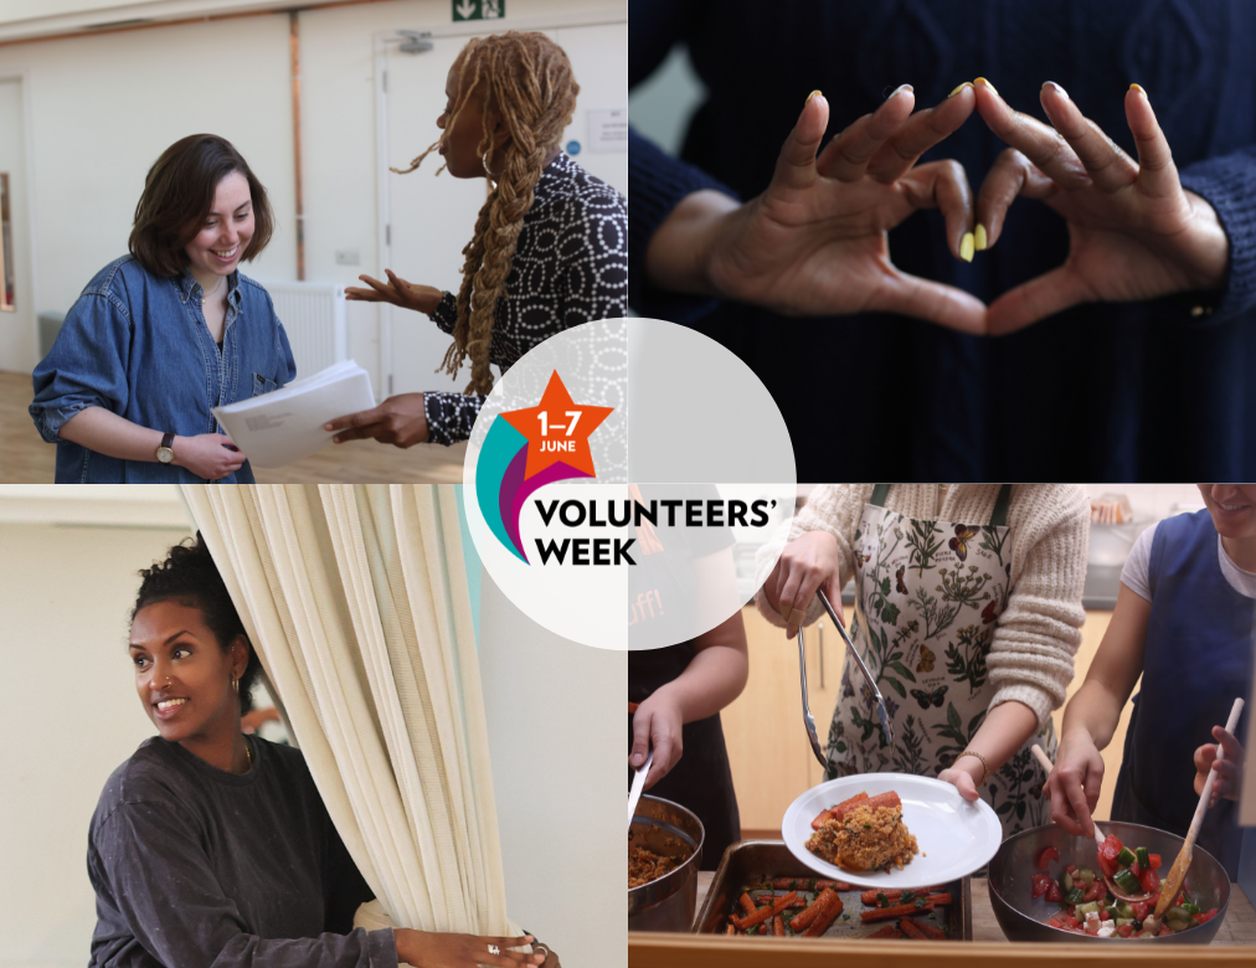 a collage of images of our volunteers, they are serving food and working on our Members Programme. In the middle it there is the volunteers week logo.